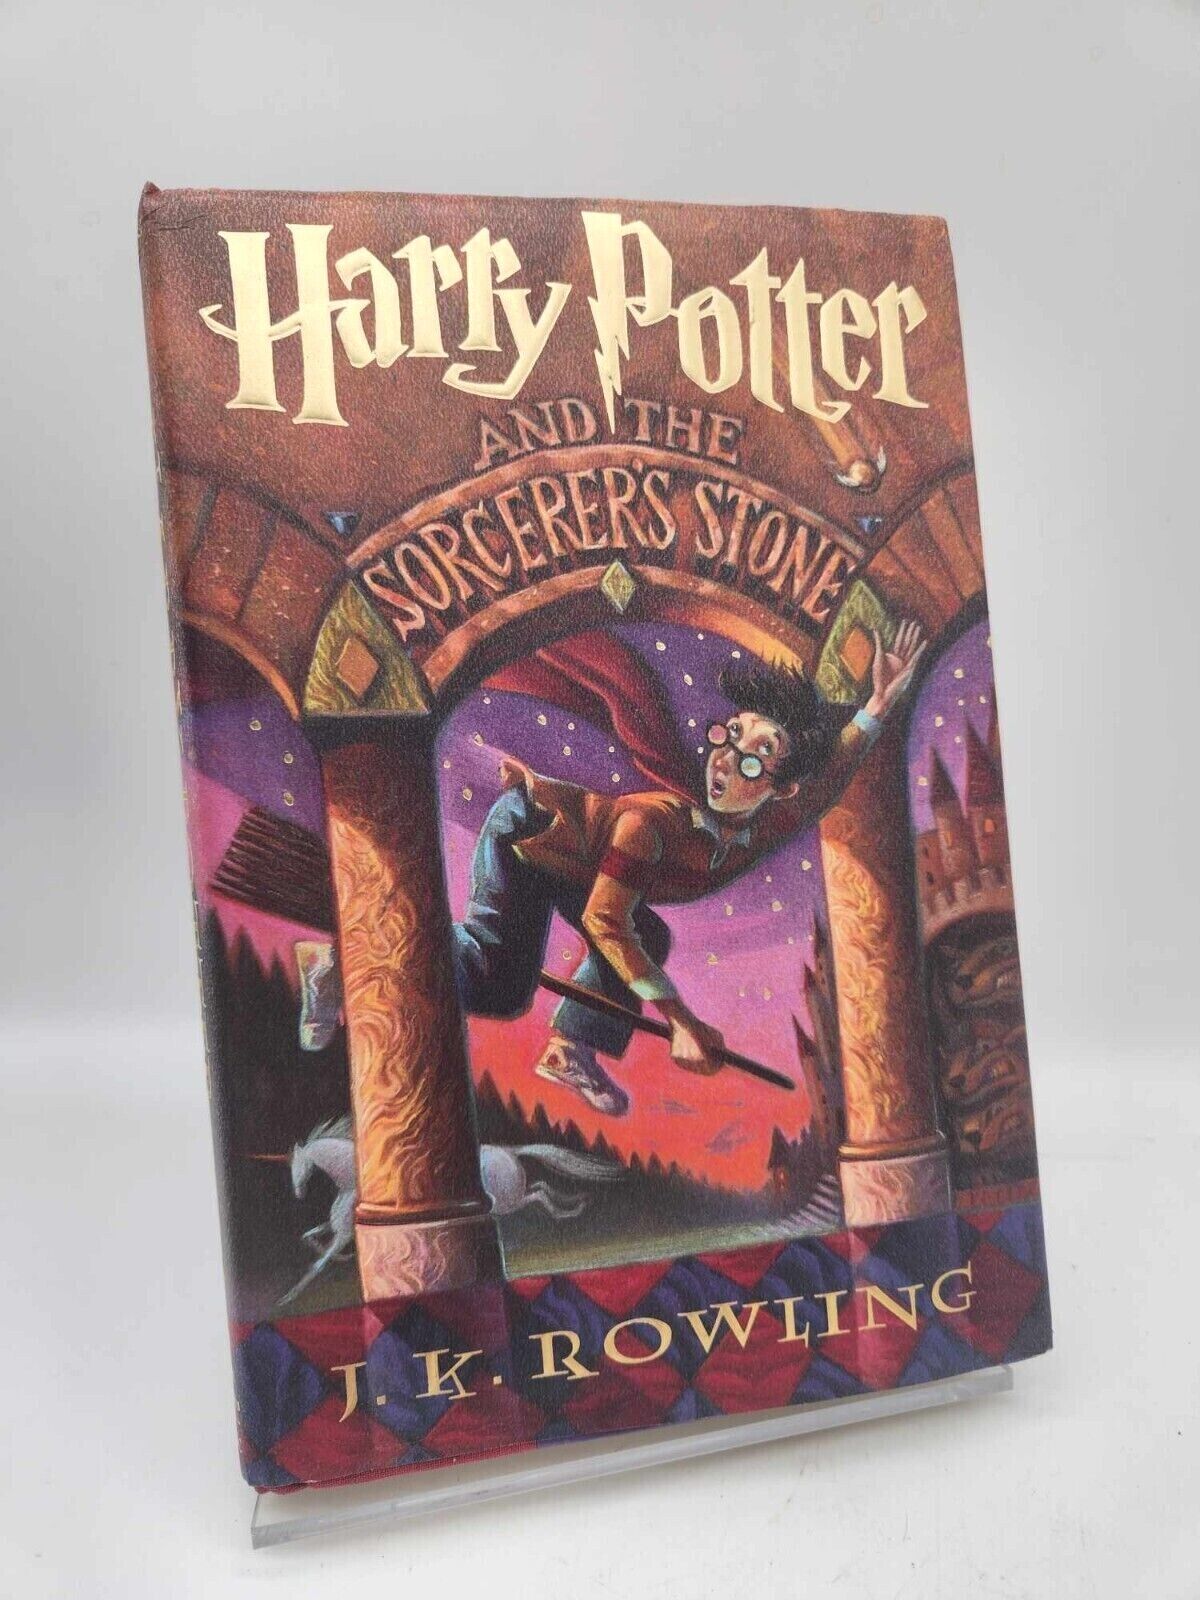 Harry Potter Complete Scholastic Hardcover First Edition Set. Build a Set. GOOD